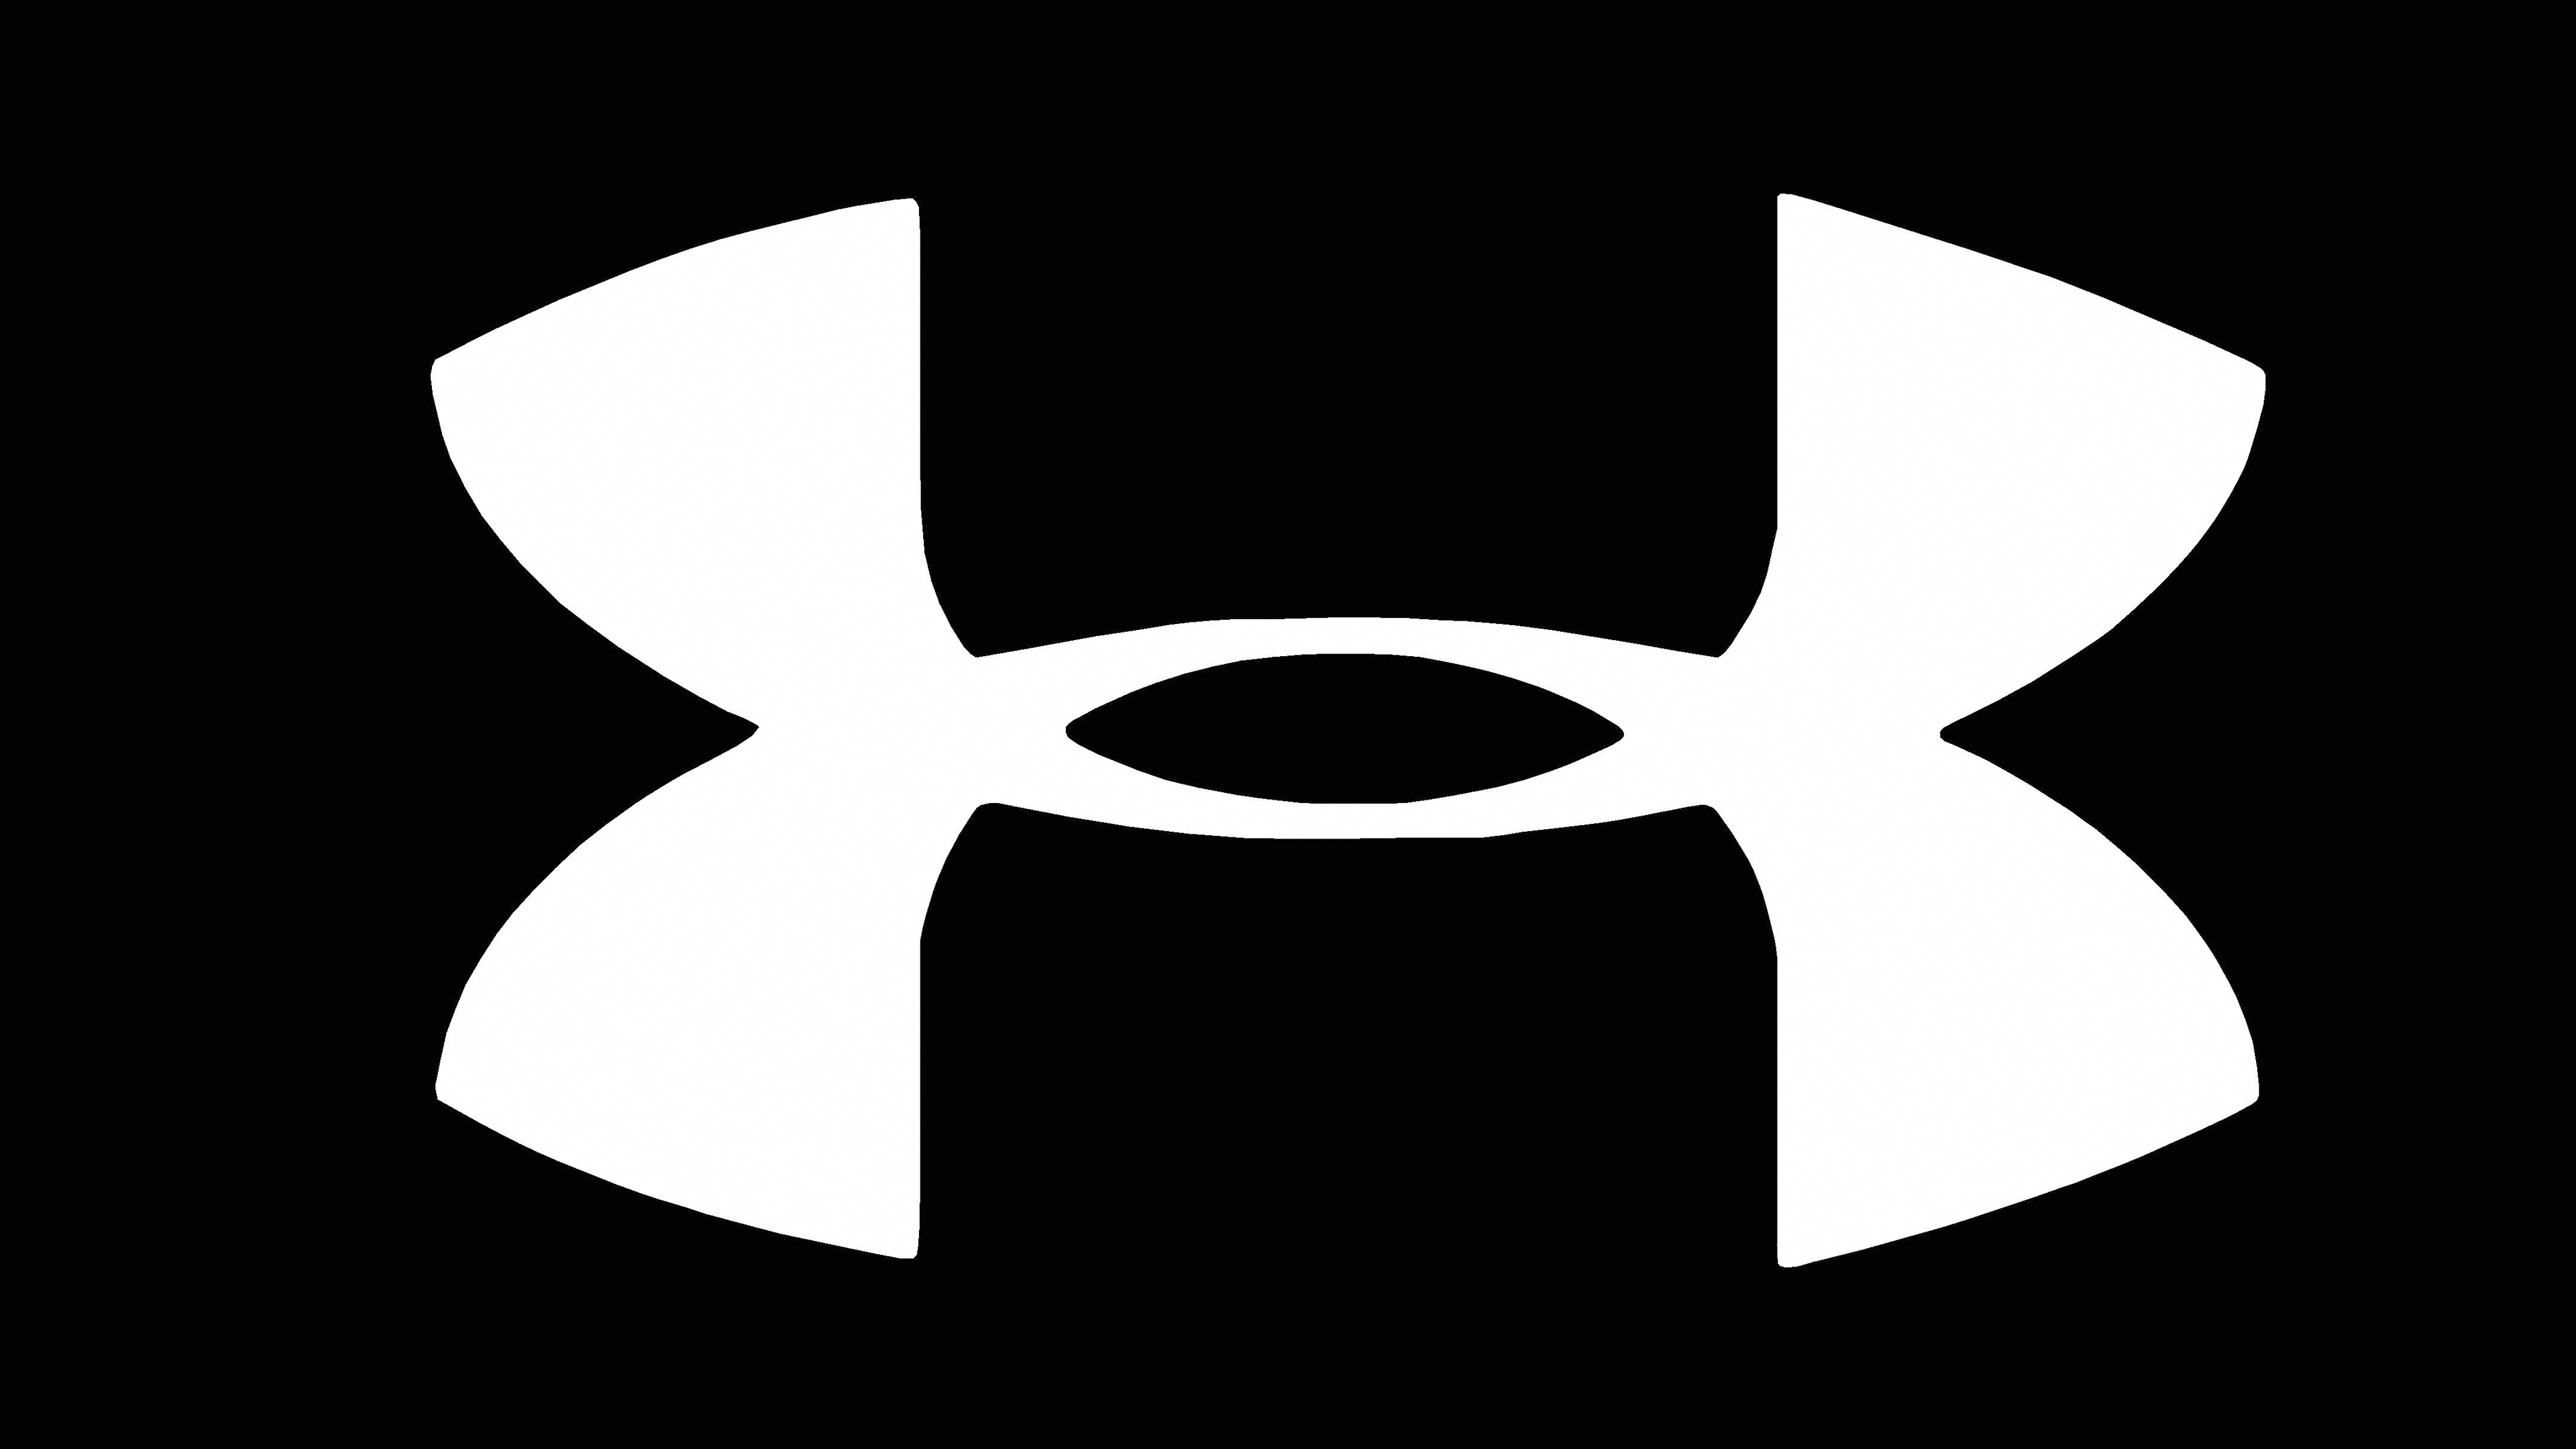 Cool Under Armour Wallpapers 06 of 40 - White Logo on Black Background ...